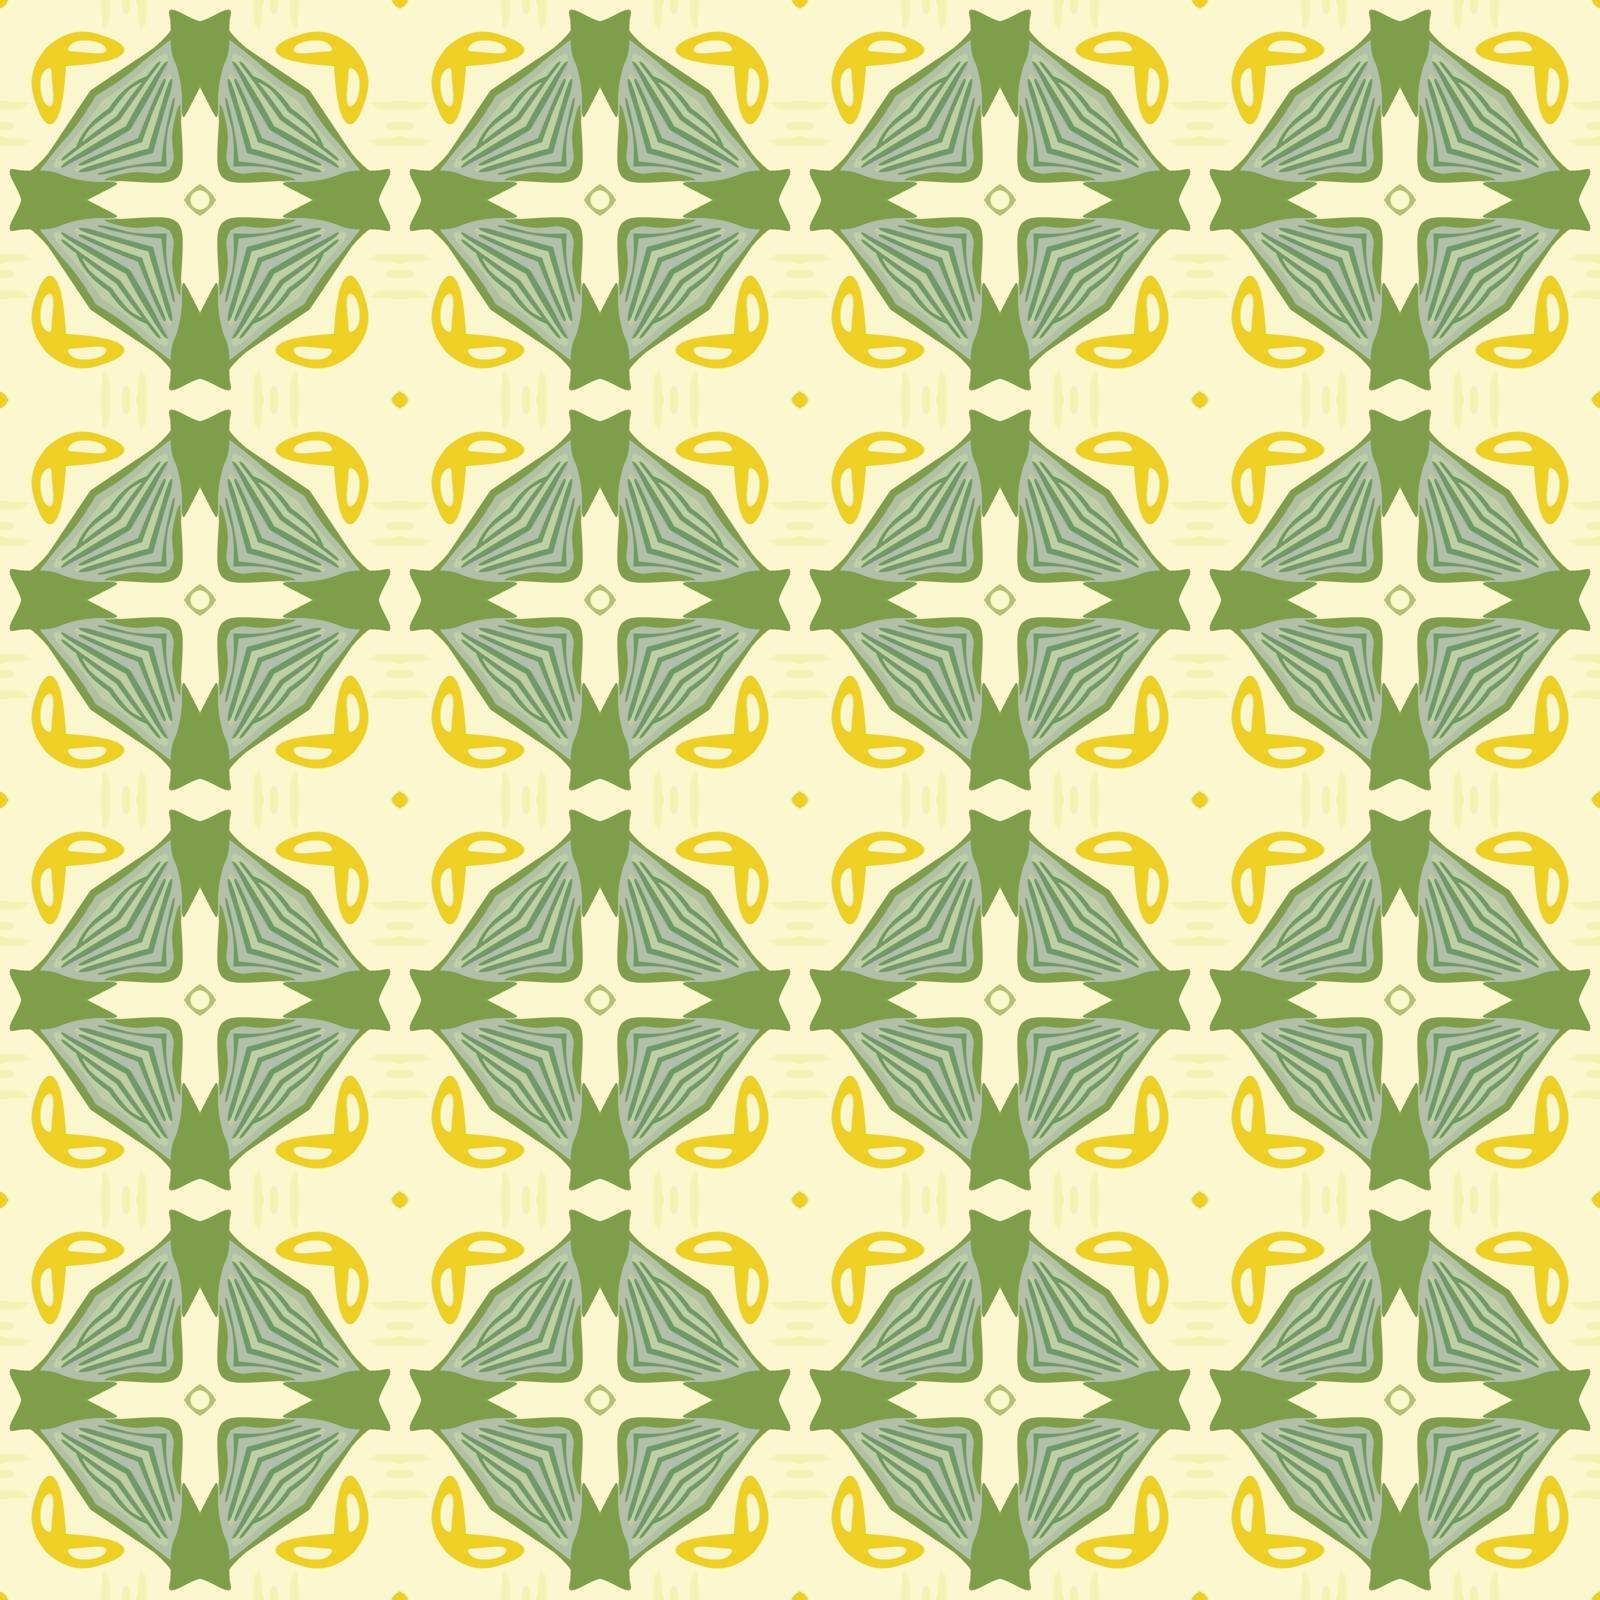 Seamless illustrated pattern made of abstract elements in beige,yellow and green